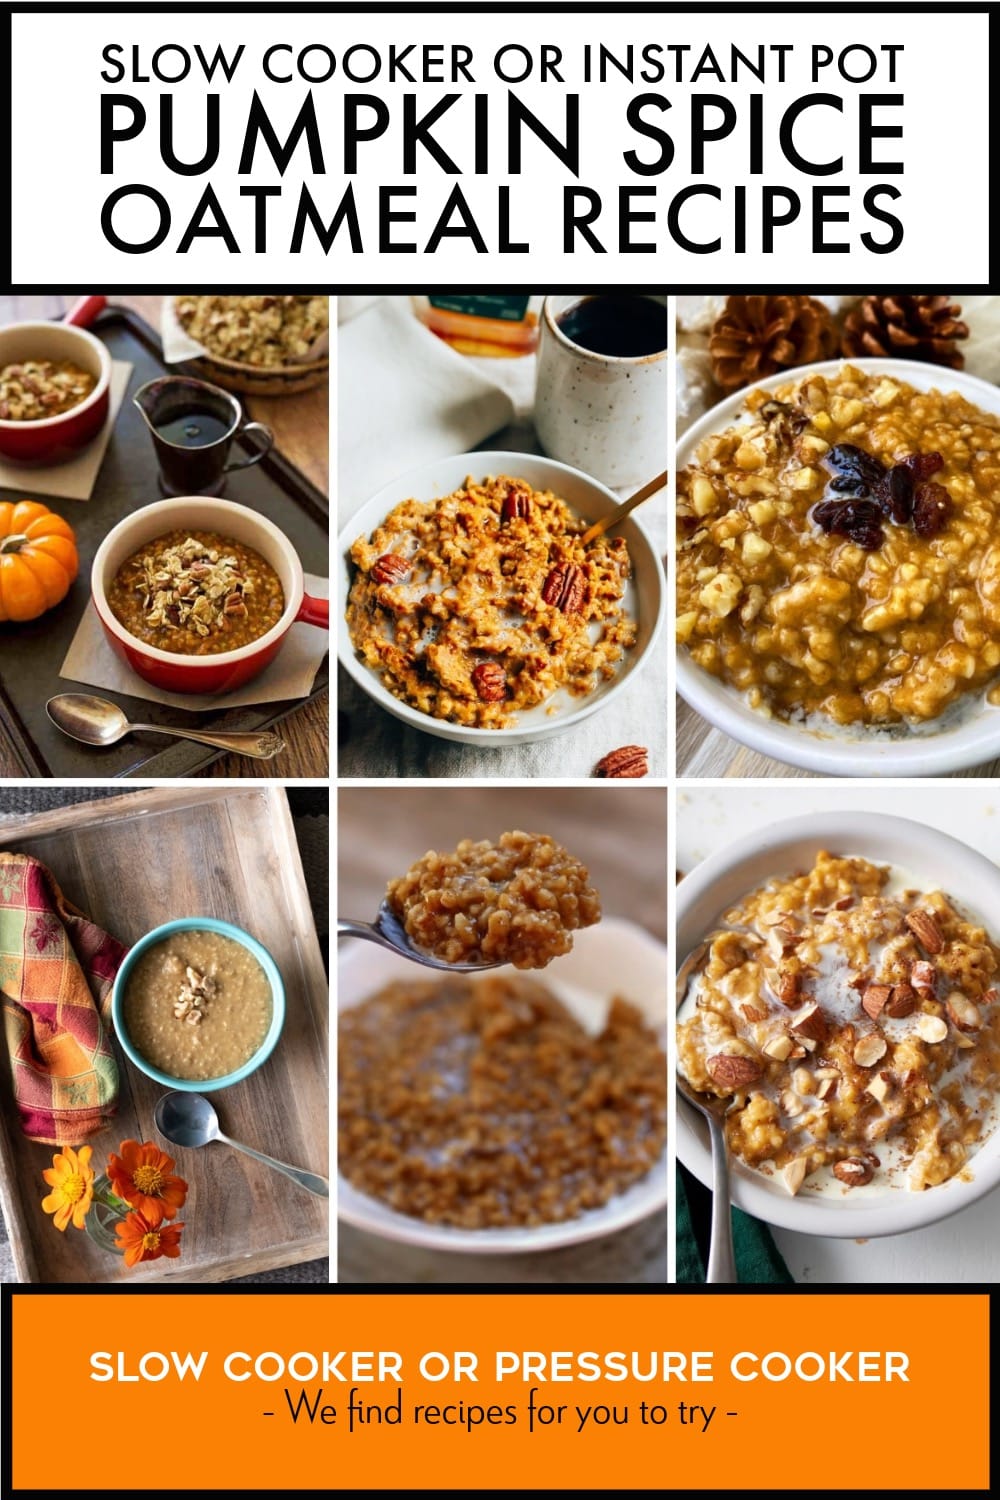 Pinterest image of Slow Cooker or Instant Pot Pumpkin Spice Oatmeal Recipes